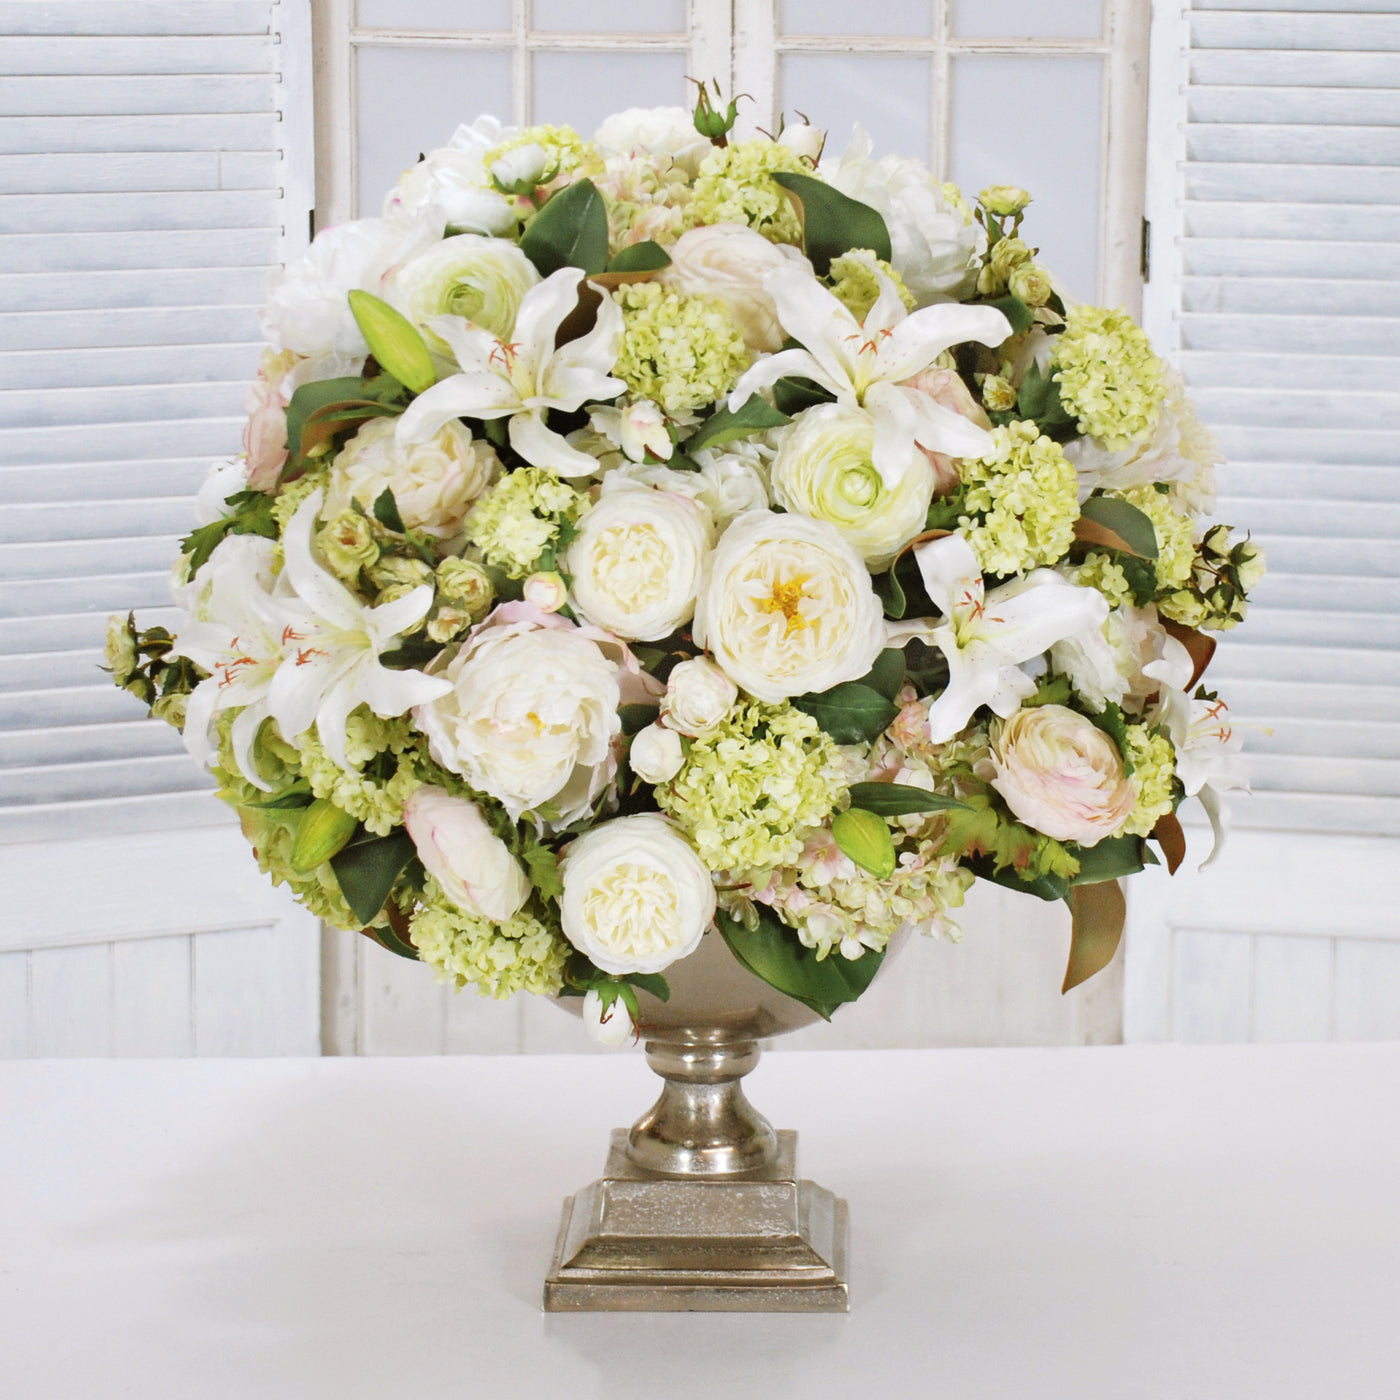 MINI ICON ROSE, PEONY, HYDRANGEA MIX (WHD107-CH) - Winward Home faux floral arrangements